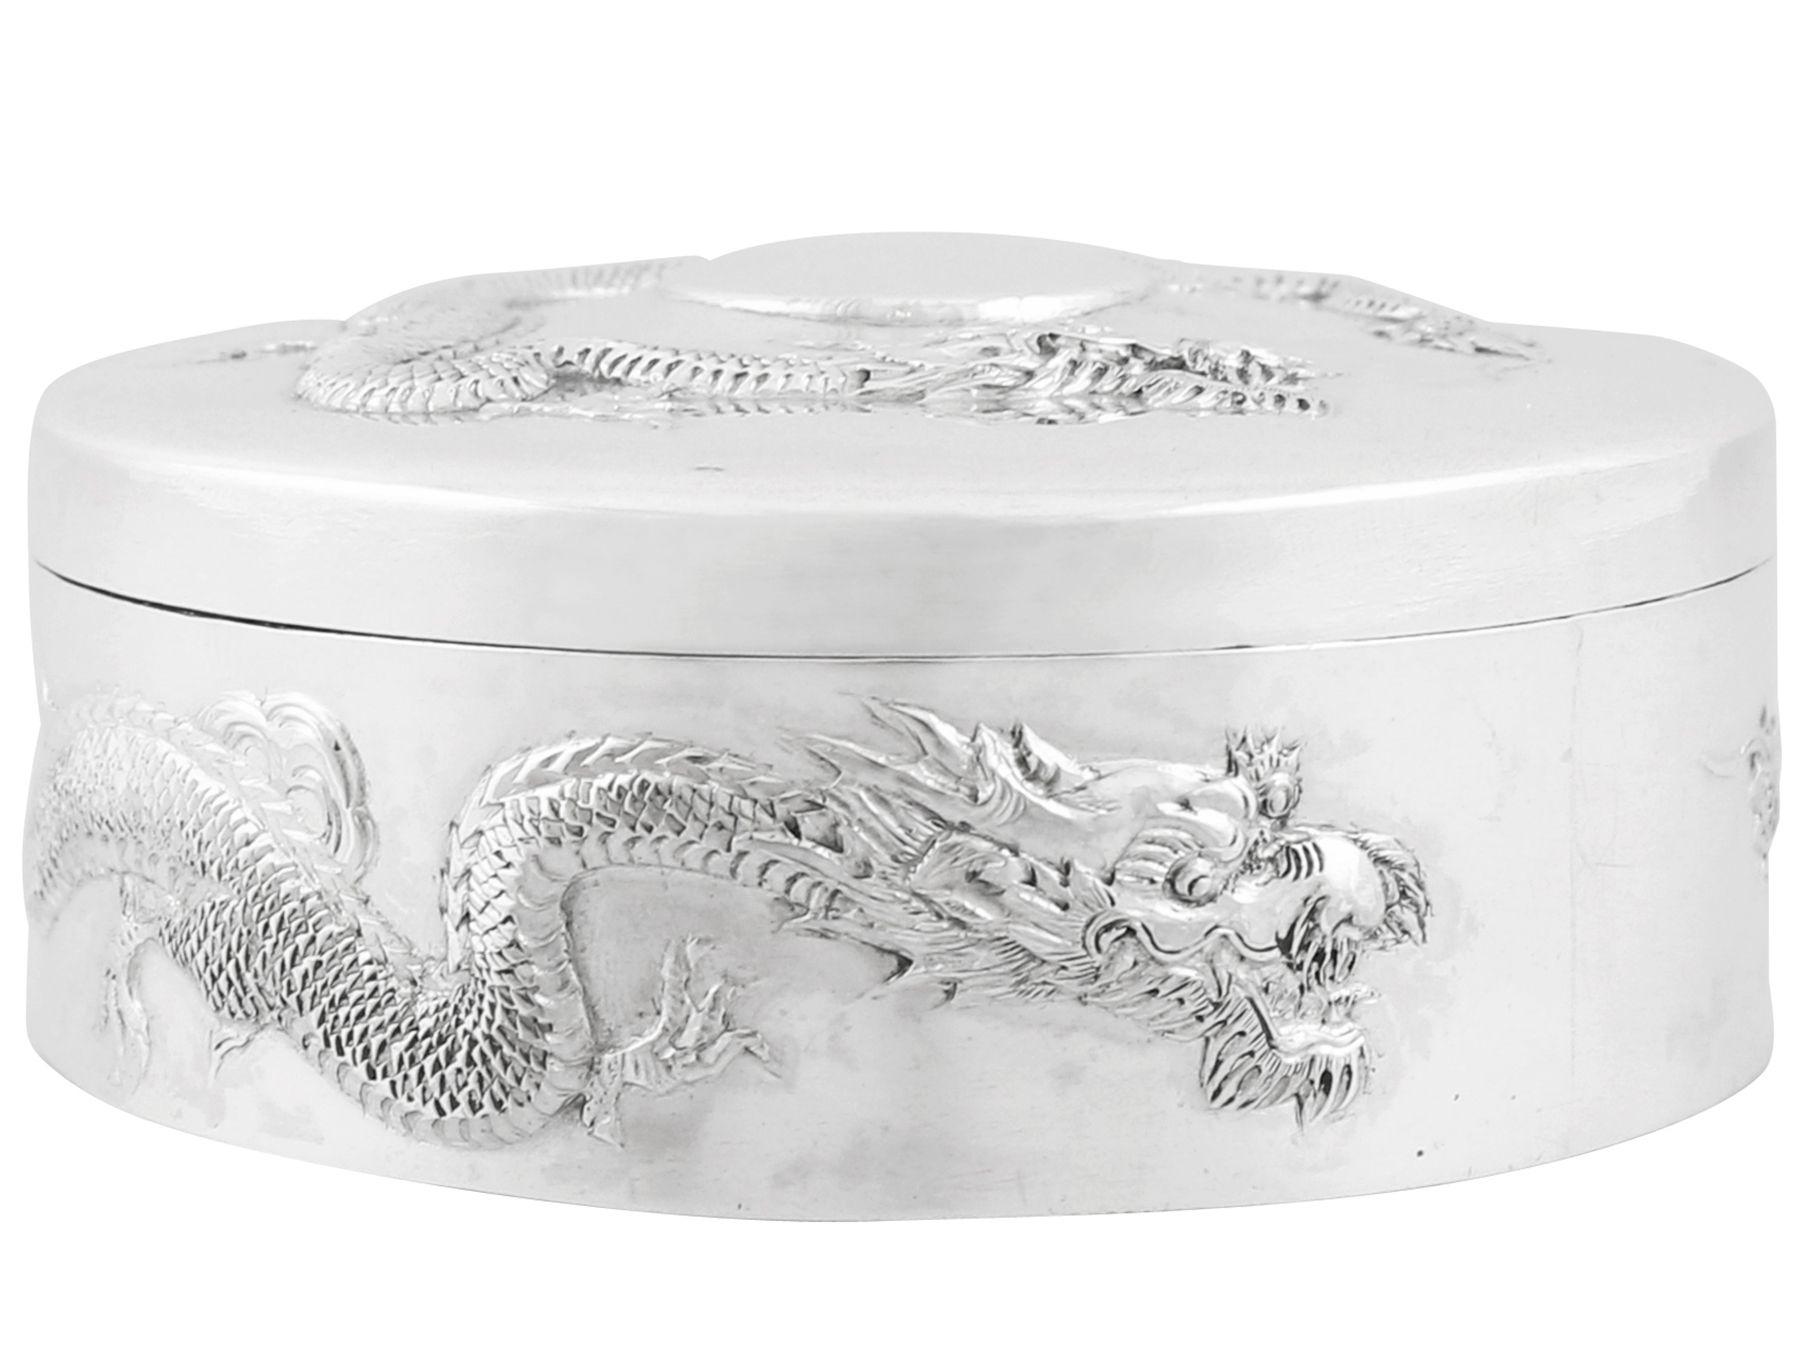 An exceptional, fine and impressive antique Chinese export silver dragon box; an addition to our collection of boxes and cases

This fine antique Chinese export silver (CES) box has a cylindrical form.

The surface of the body is embellished